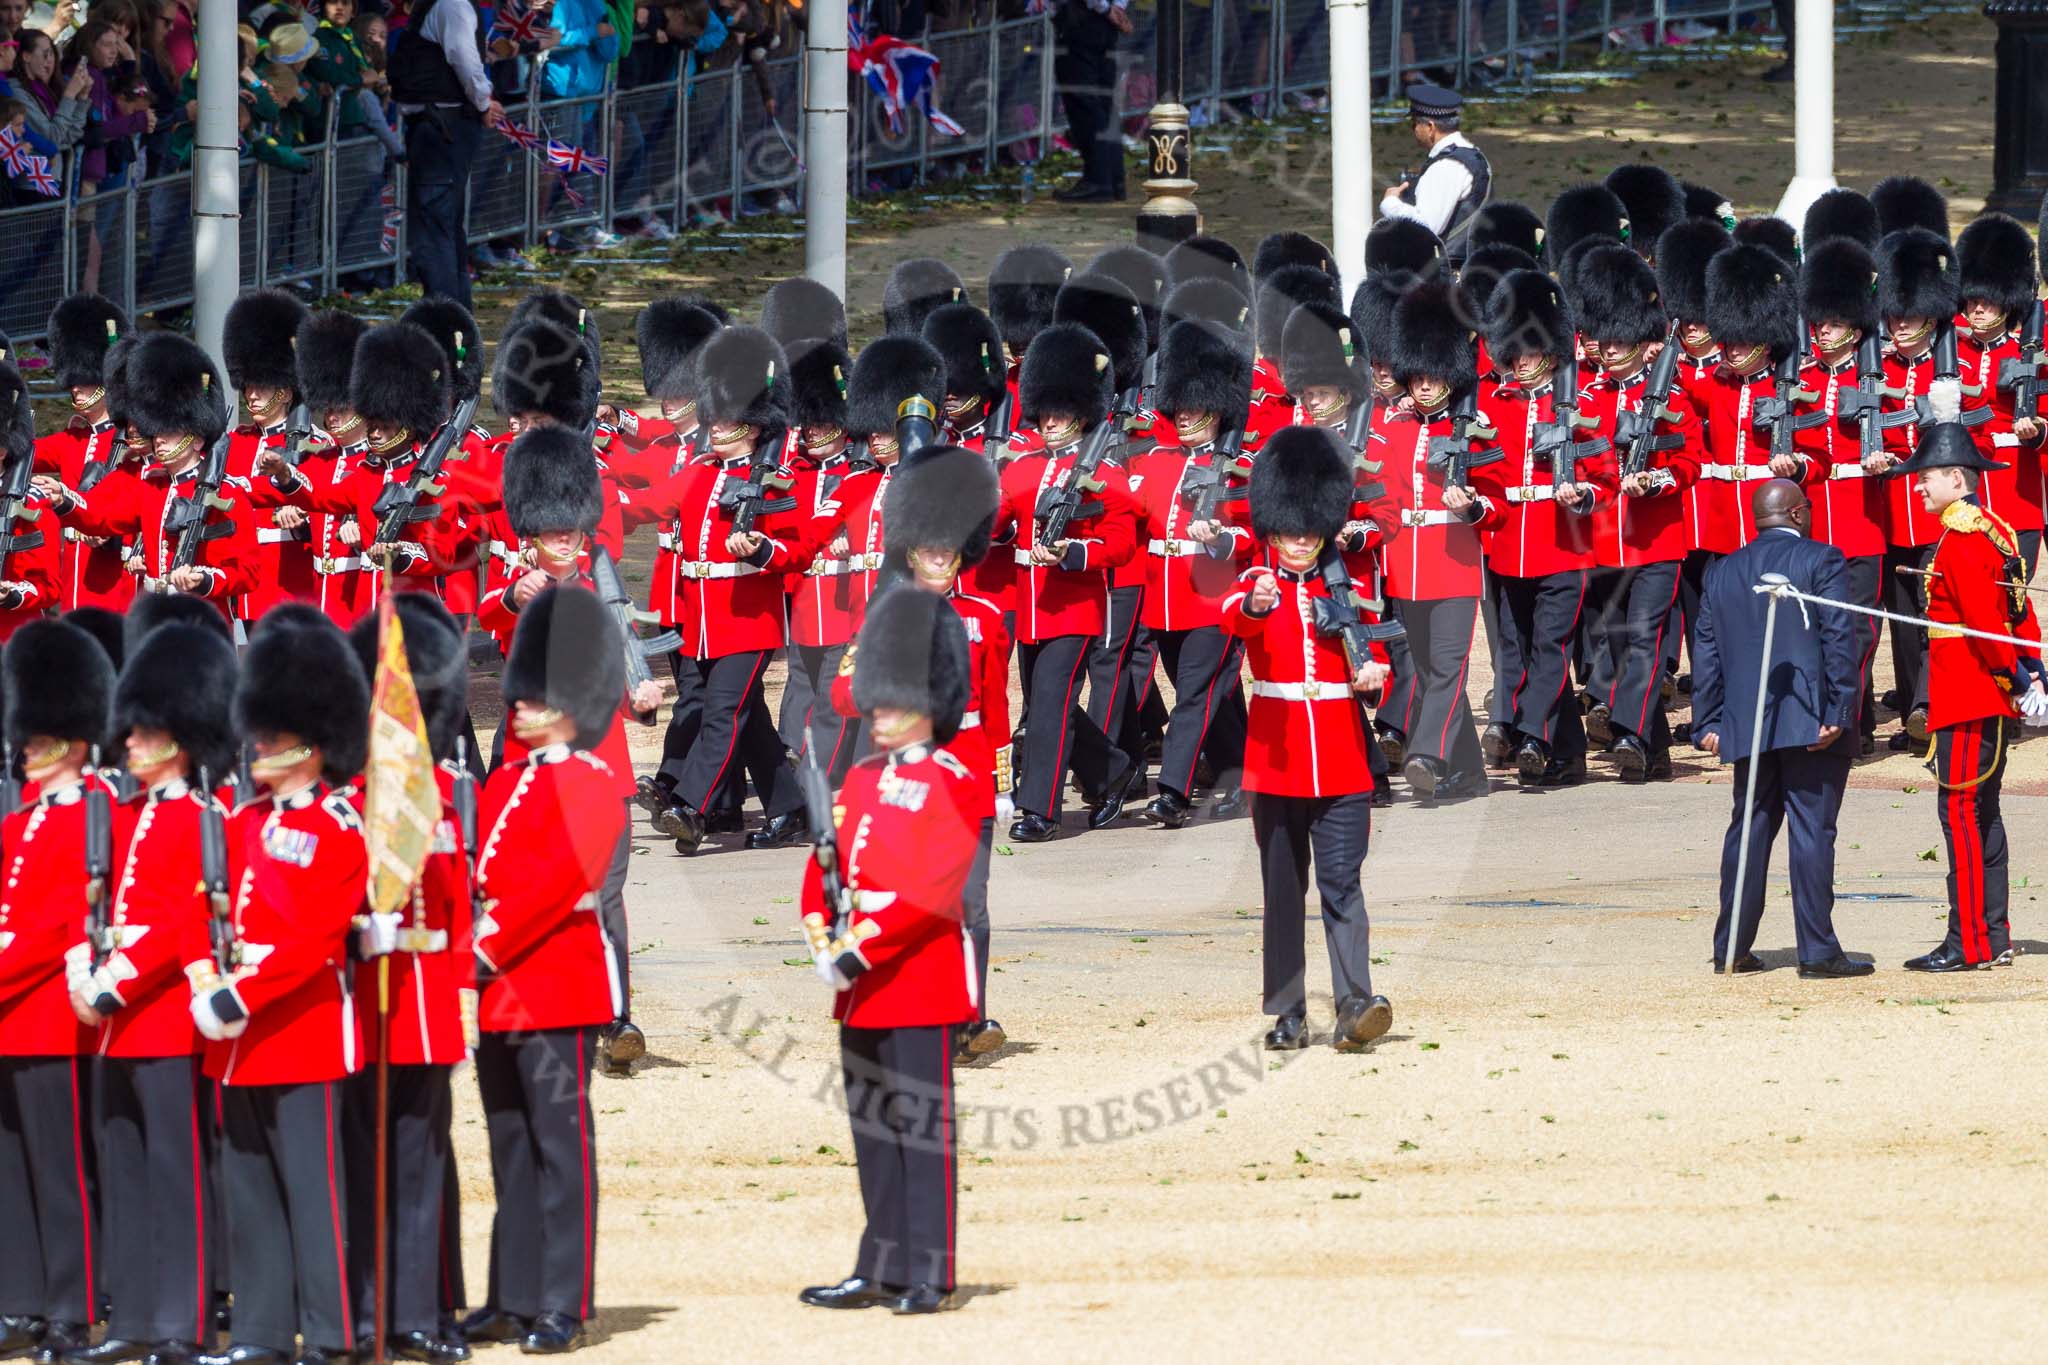 The Colonel's Review 2015.
Horse Guards Parade, Westminster,
London,

United Kingdom,
on 06 June 2015 at 10:30, image #87